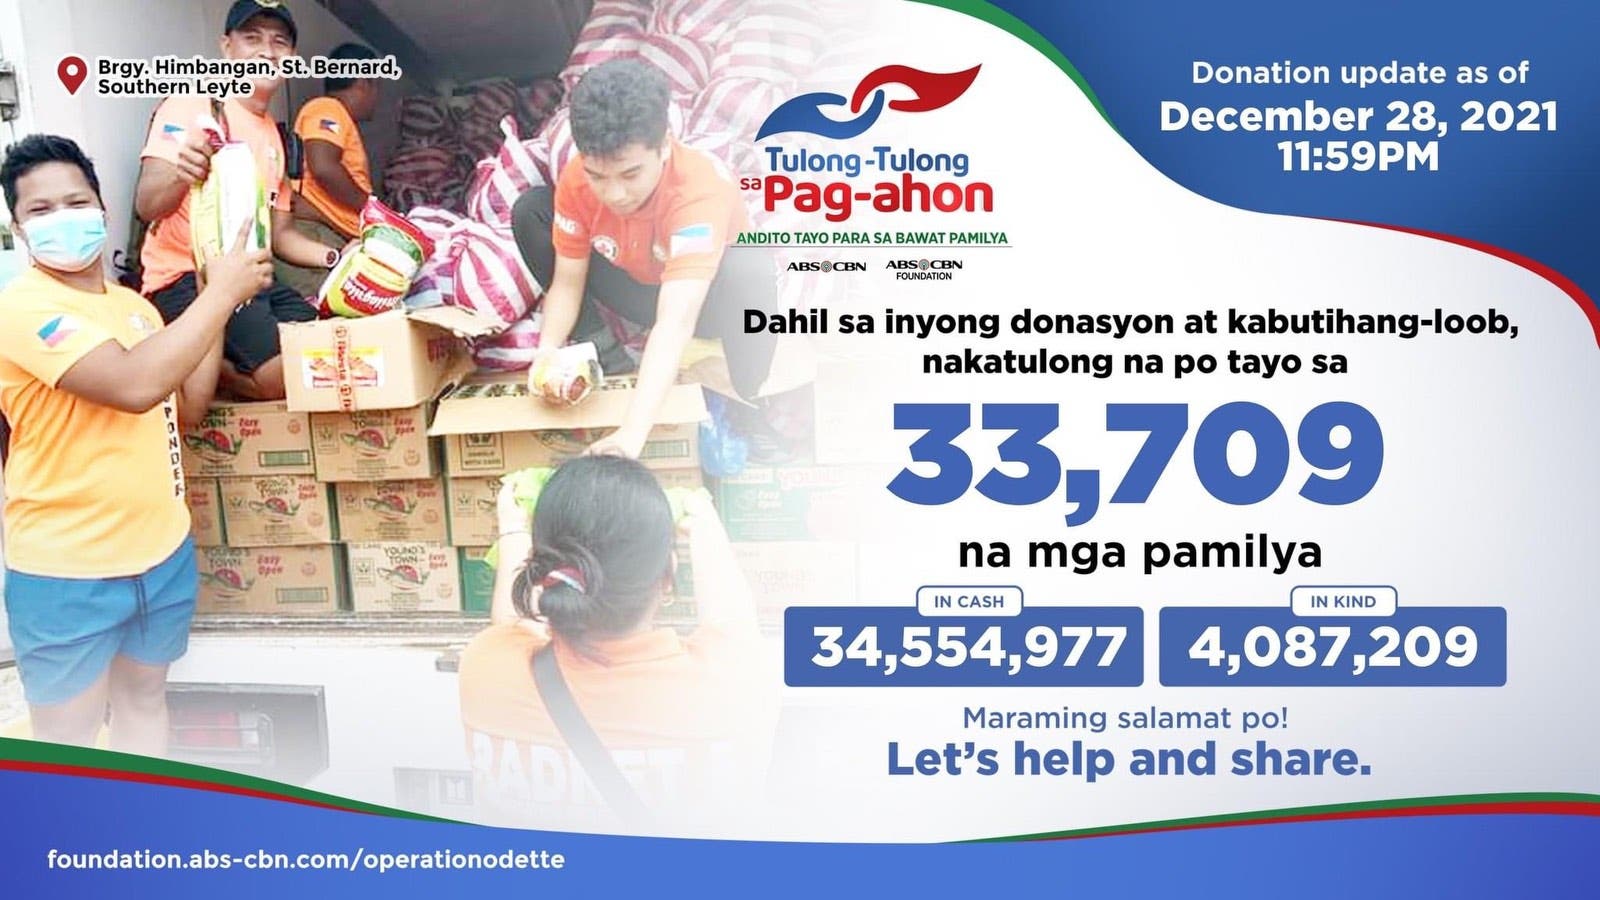 Abs Cbn Foundation Brings Relief Goods For 33 709 Families Impacted By Typhoon Odette Starmometer